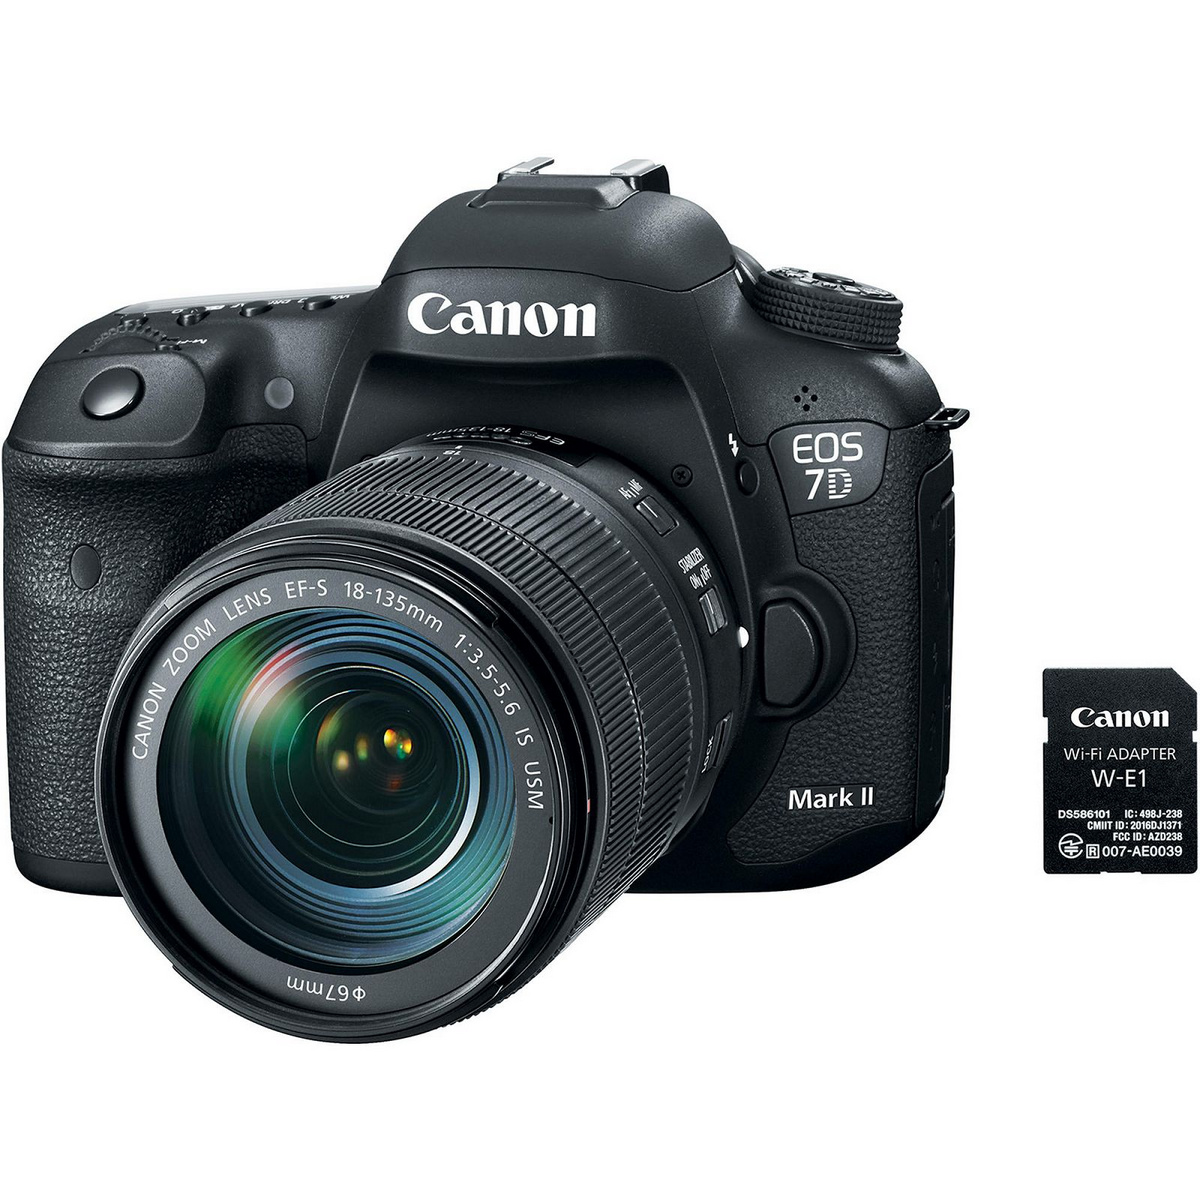 Canon Camera and Photo at Best Price